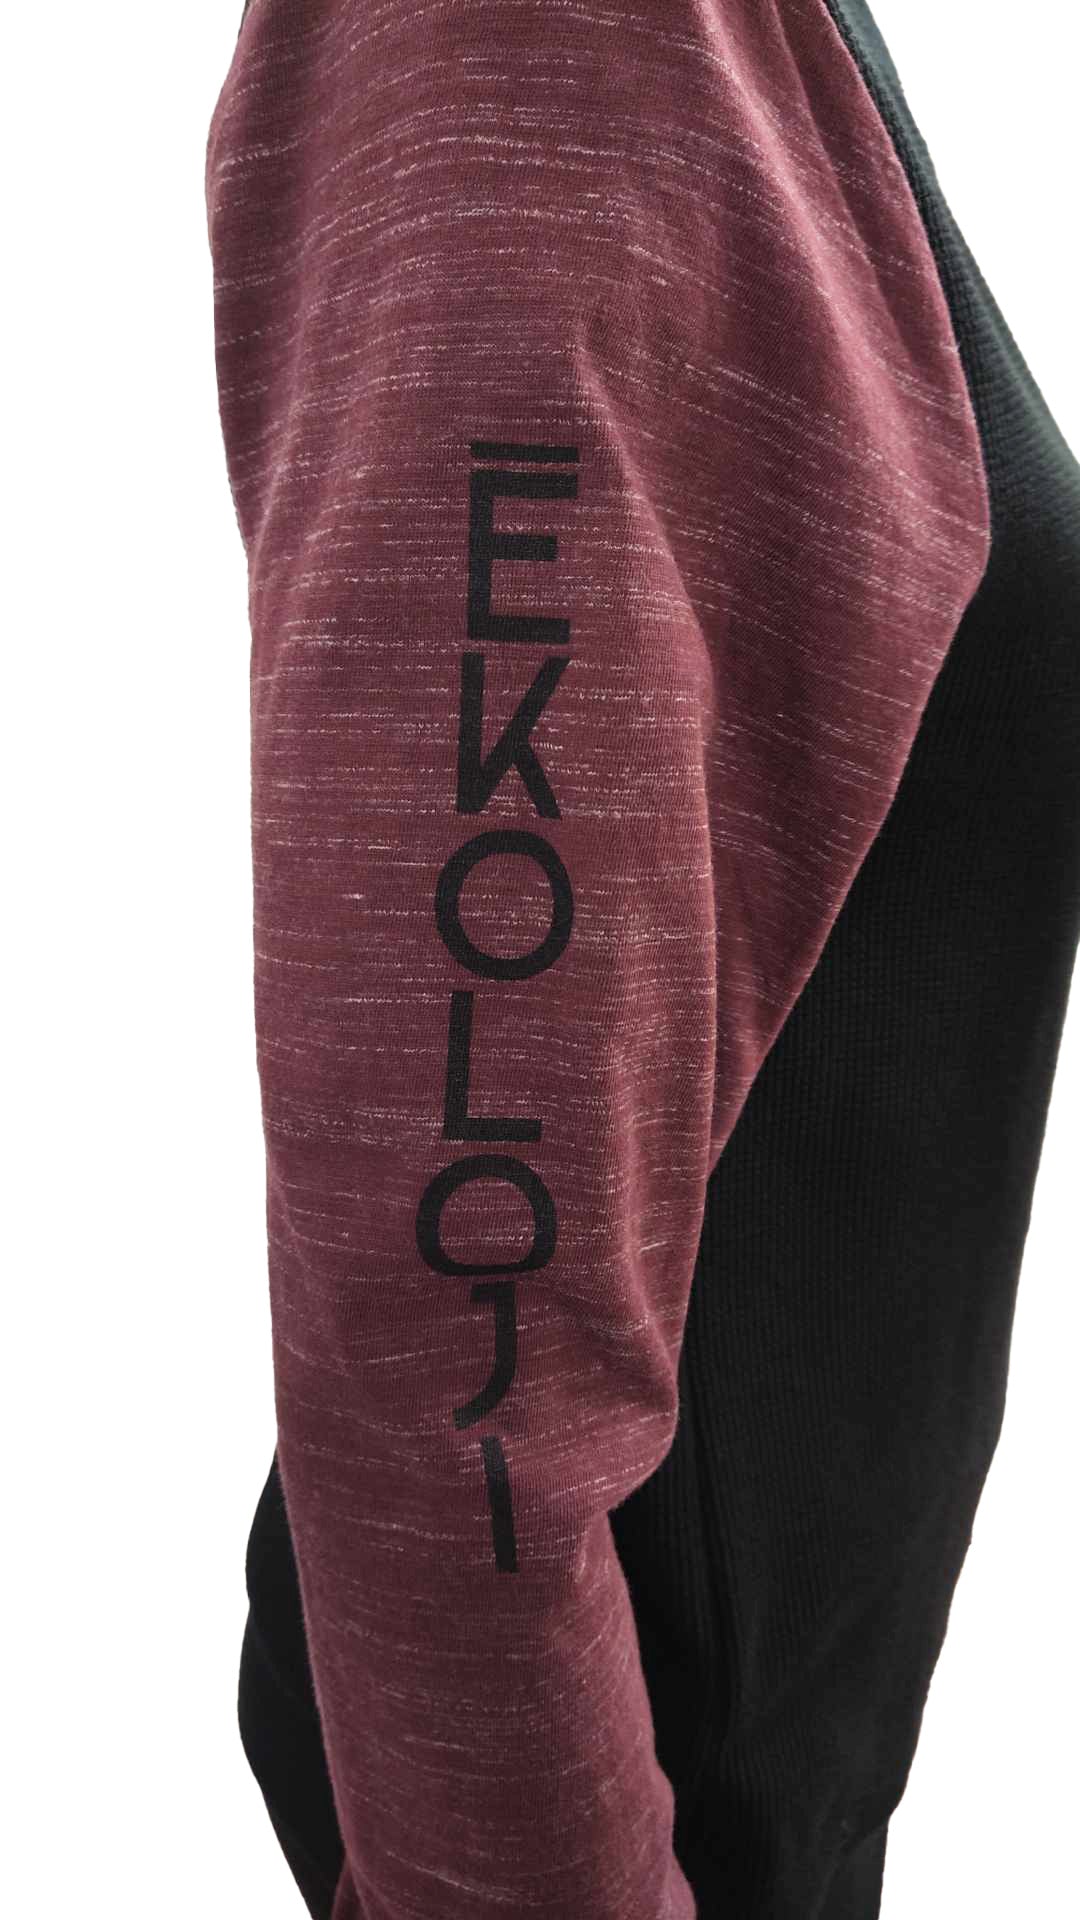 MED-t-shirt BERLIN-Right-sleeve view in solid burgundy